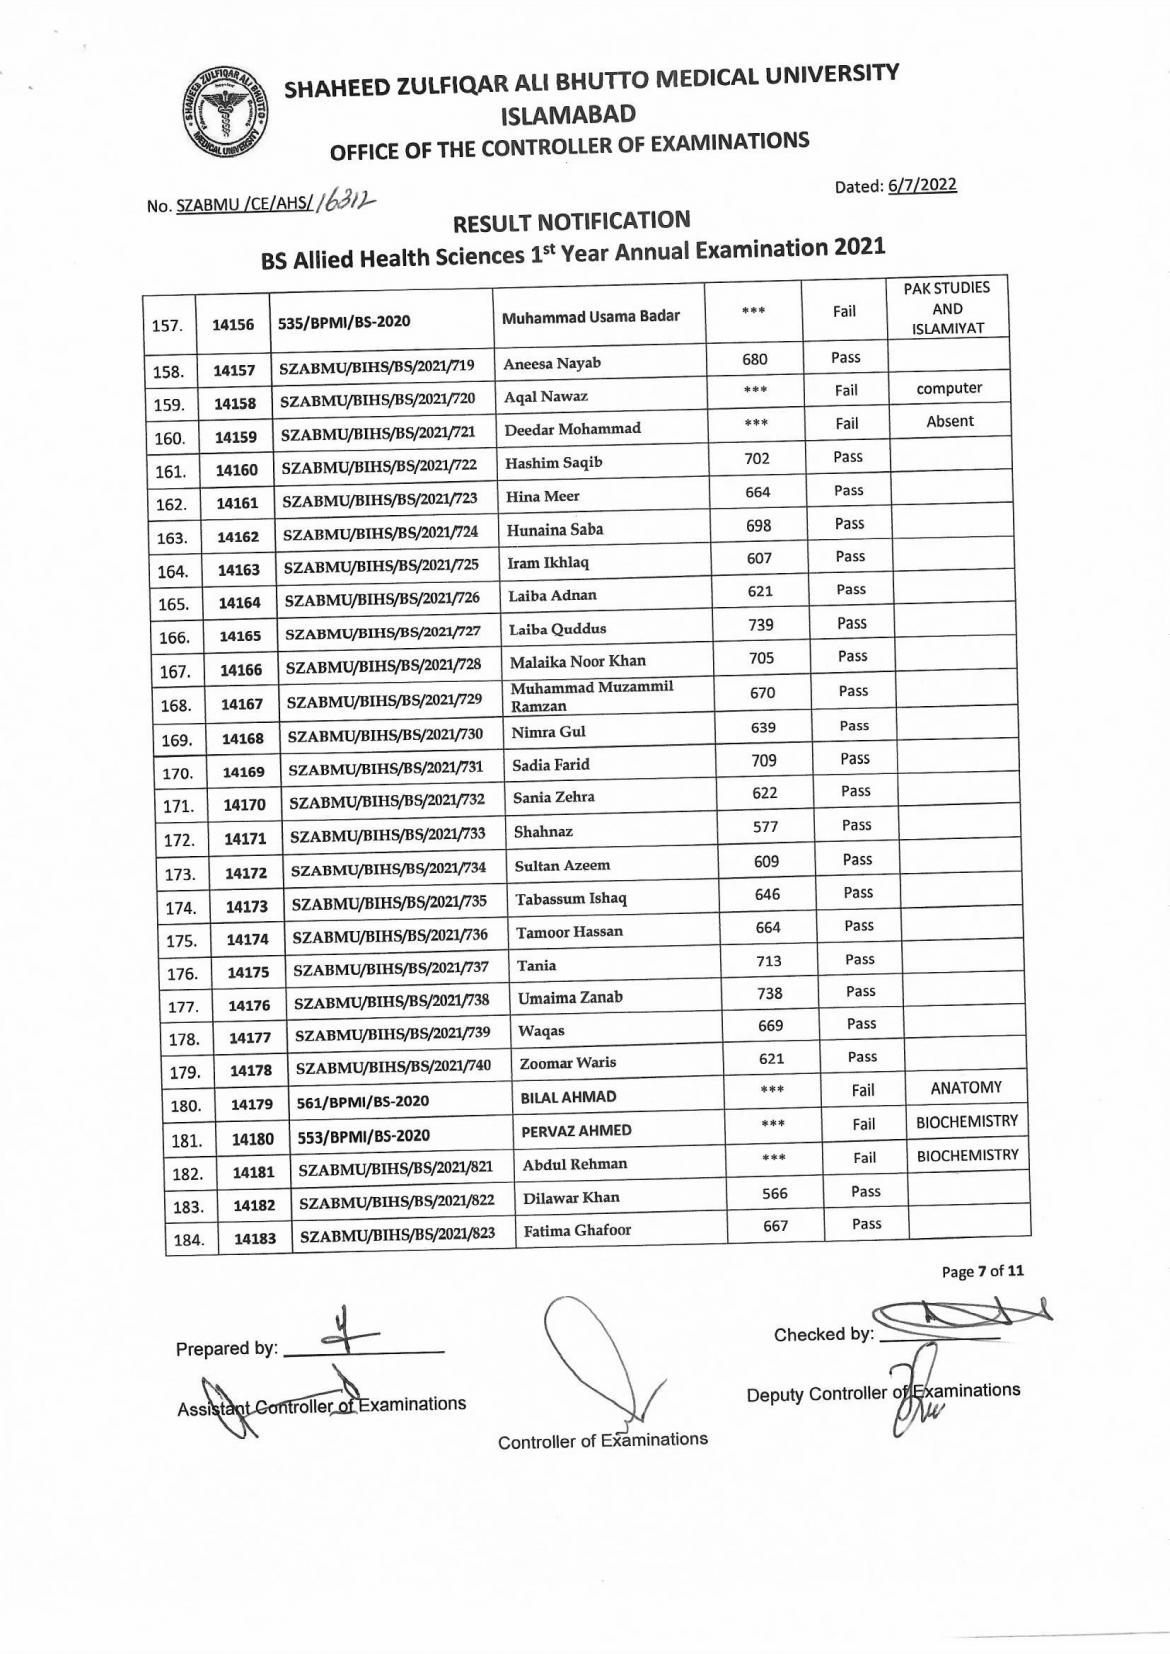 Result Notification - BS AHS 1st Year Annual Examination 2021